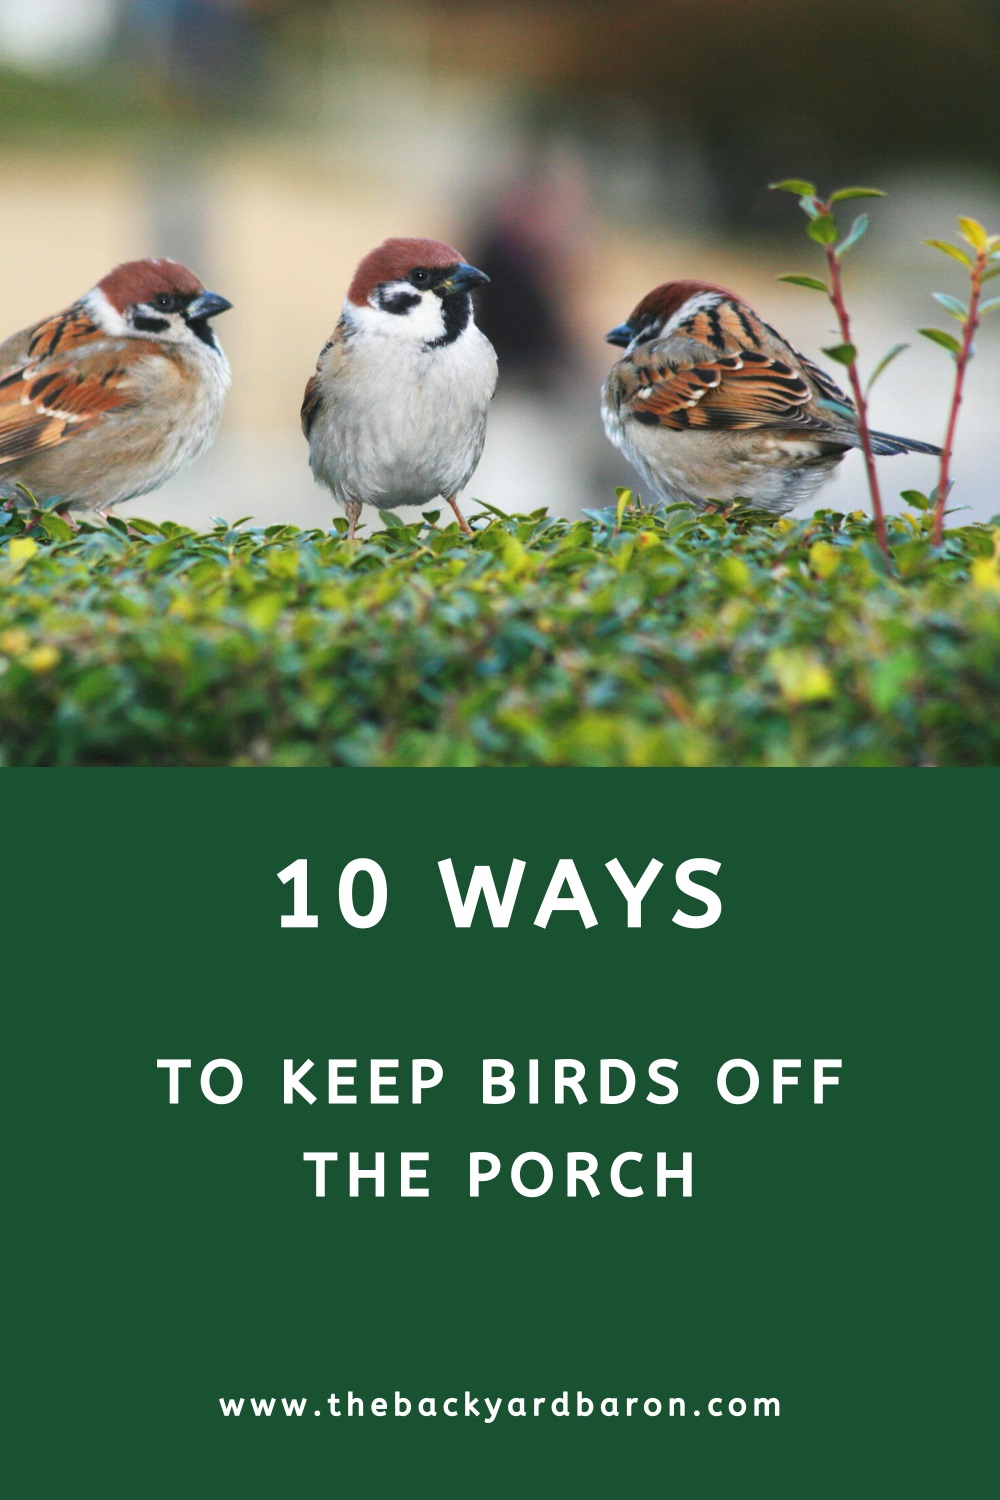 10 Ways to keep birds off the porch